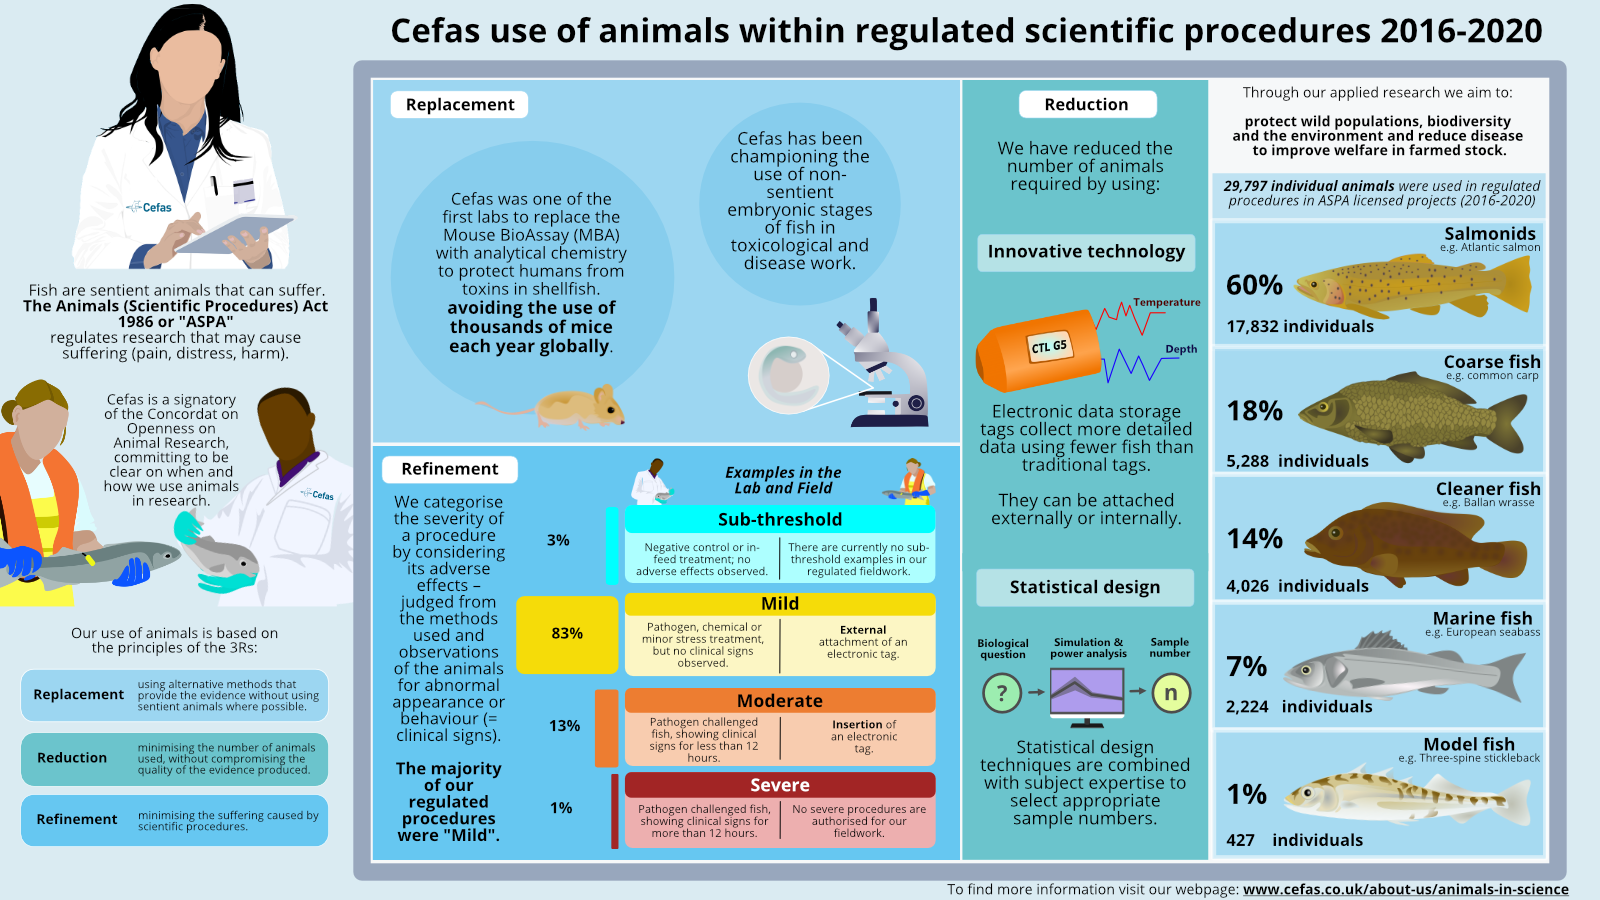 infographic describing Cefas' use of protected animals